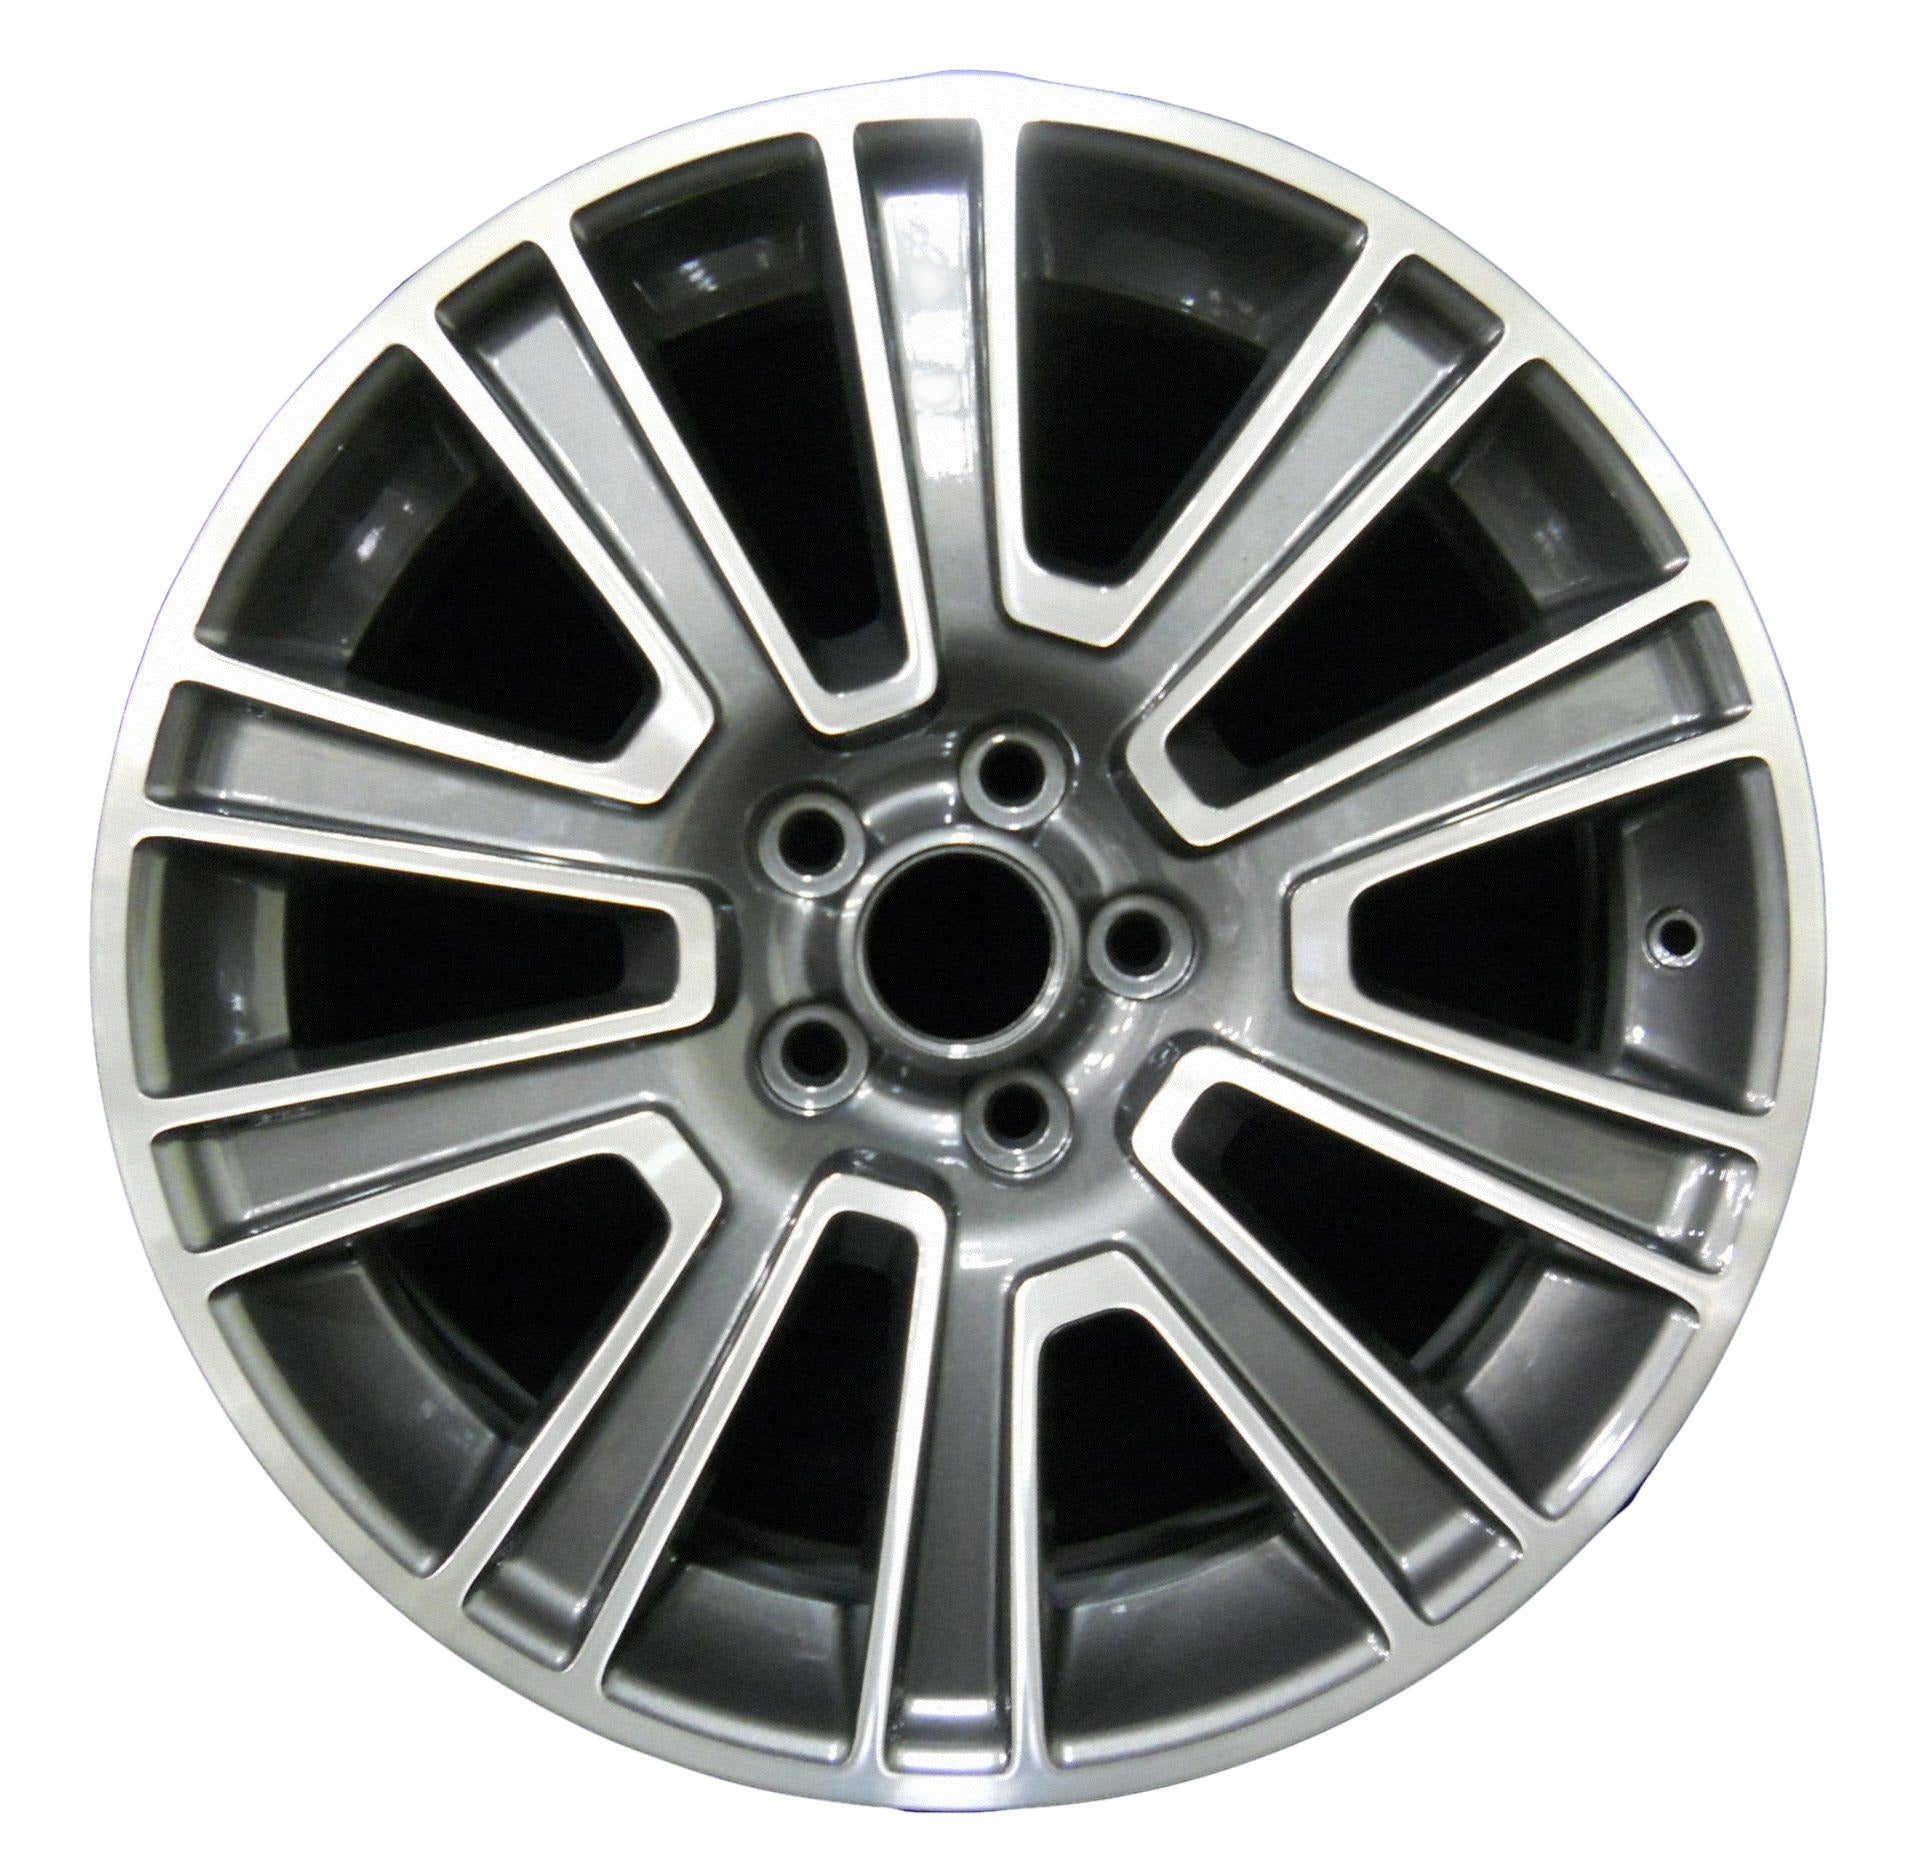 Ford Mustang  2010, 2011, 2012 Factory OEM Car Wheel Size 19x8.5 Alloy WAO.3813.LC36.MA